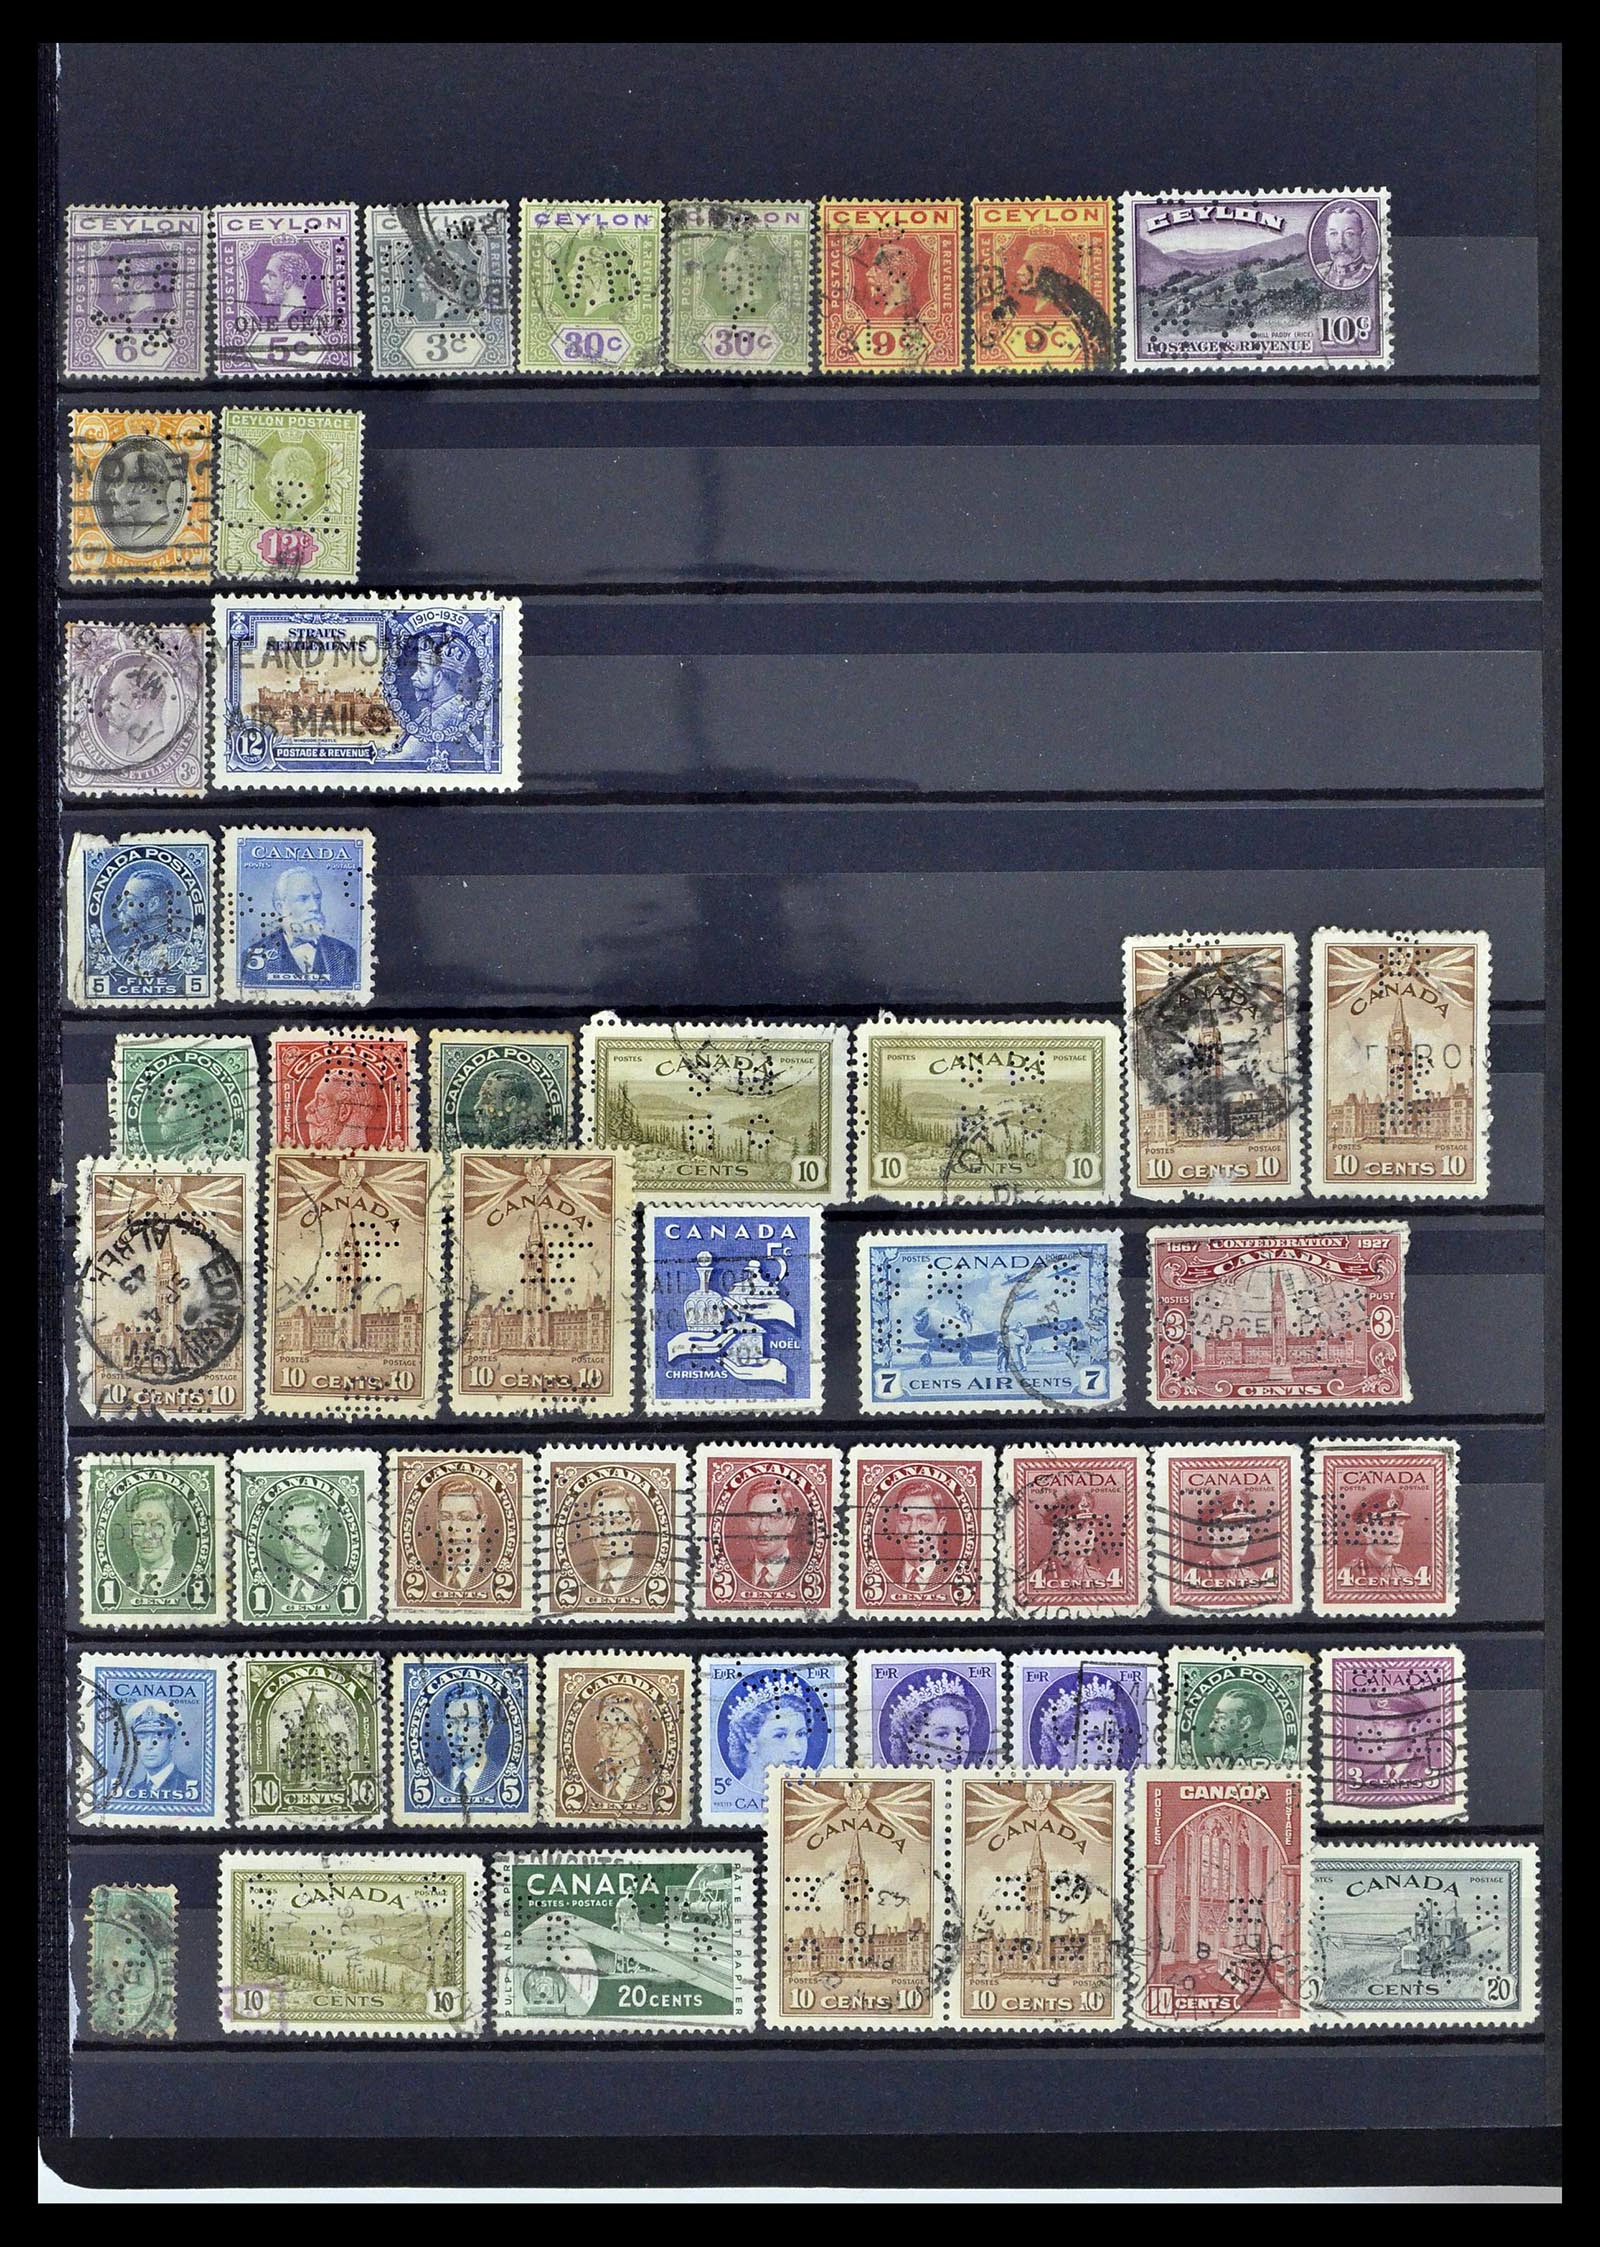 39196 0136 - Stamp collection 39196 Great Britain 1844-1955.